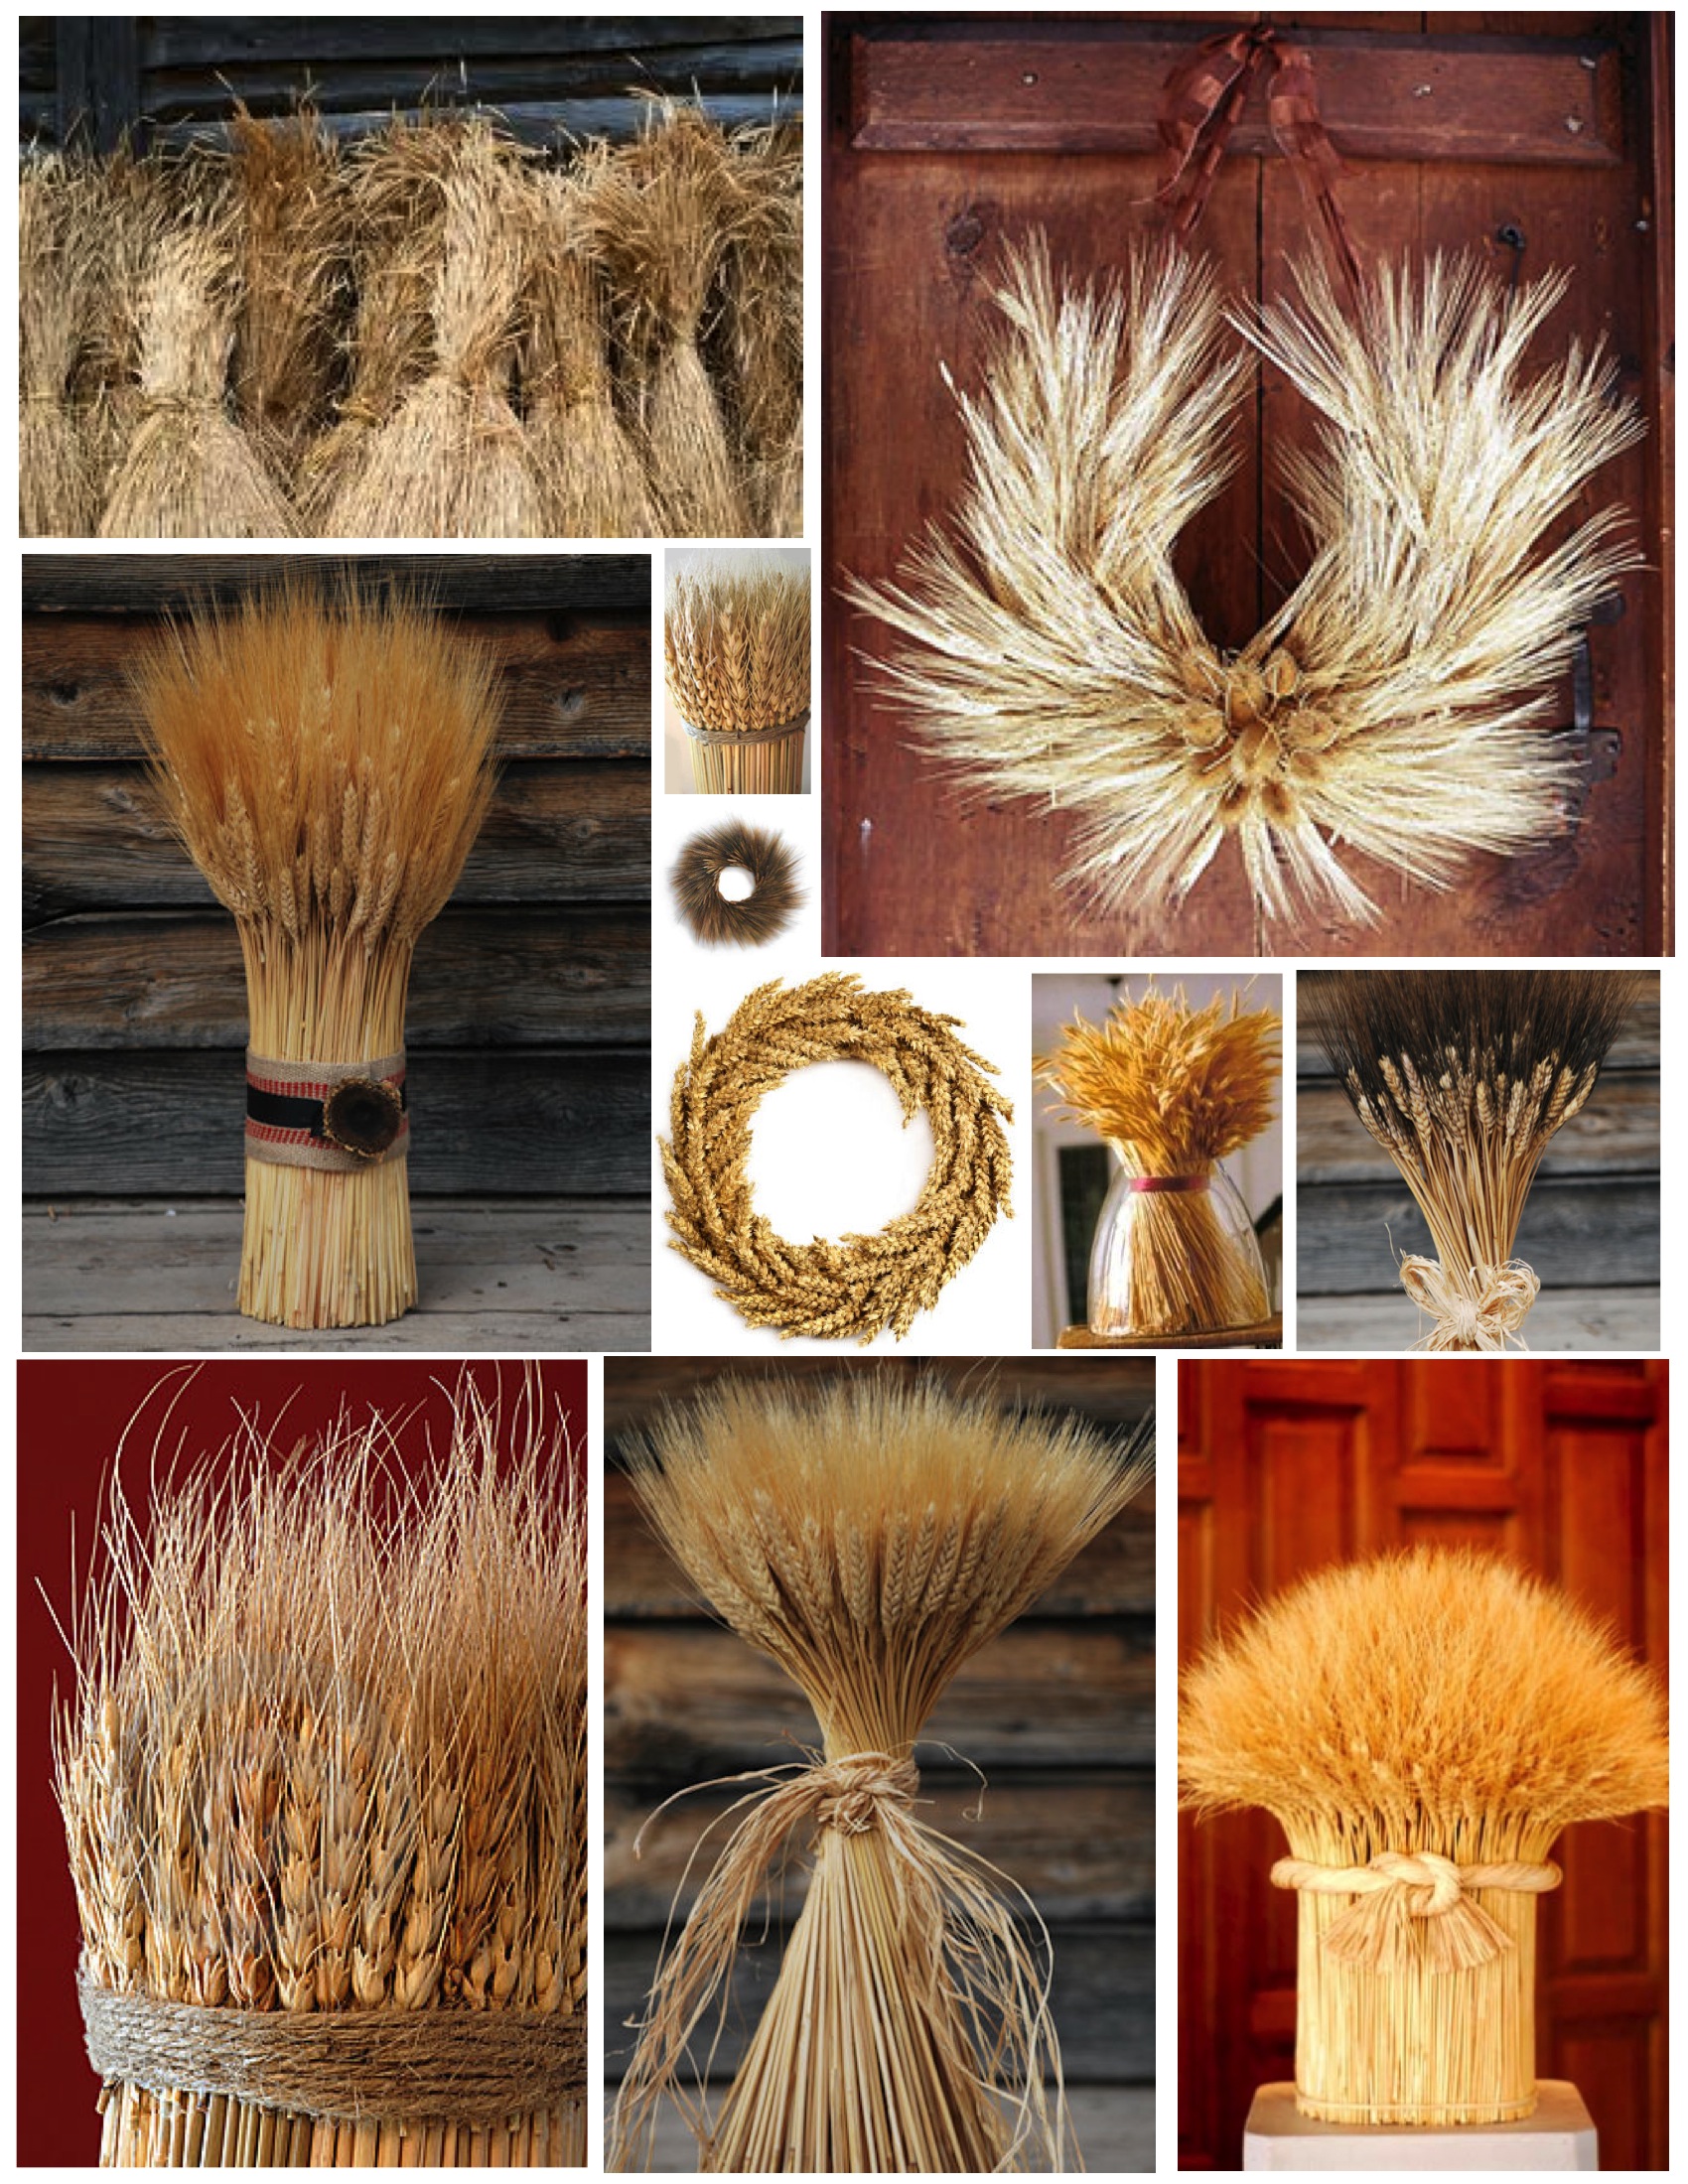 Wheat: Natural Of Style Within A | Interior Of Appeal House The Appeal The Bounty